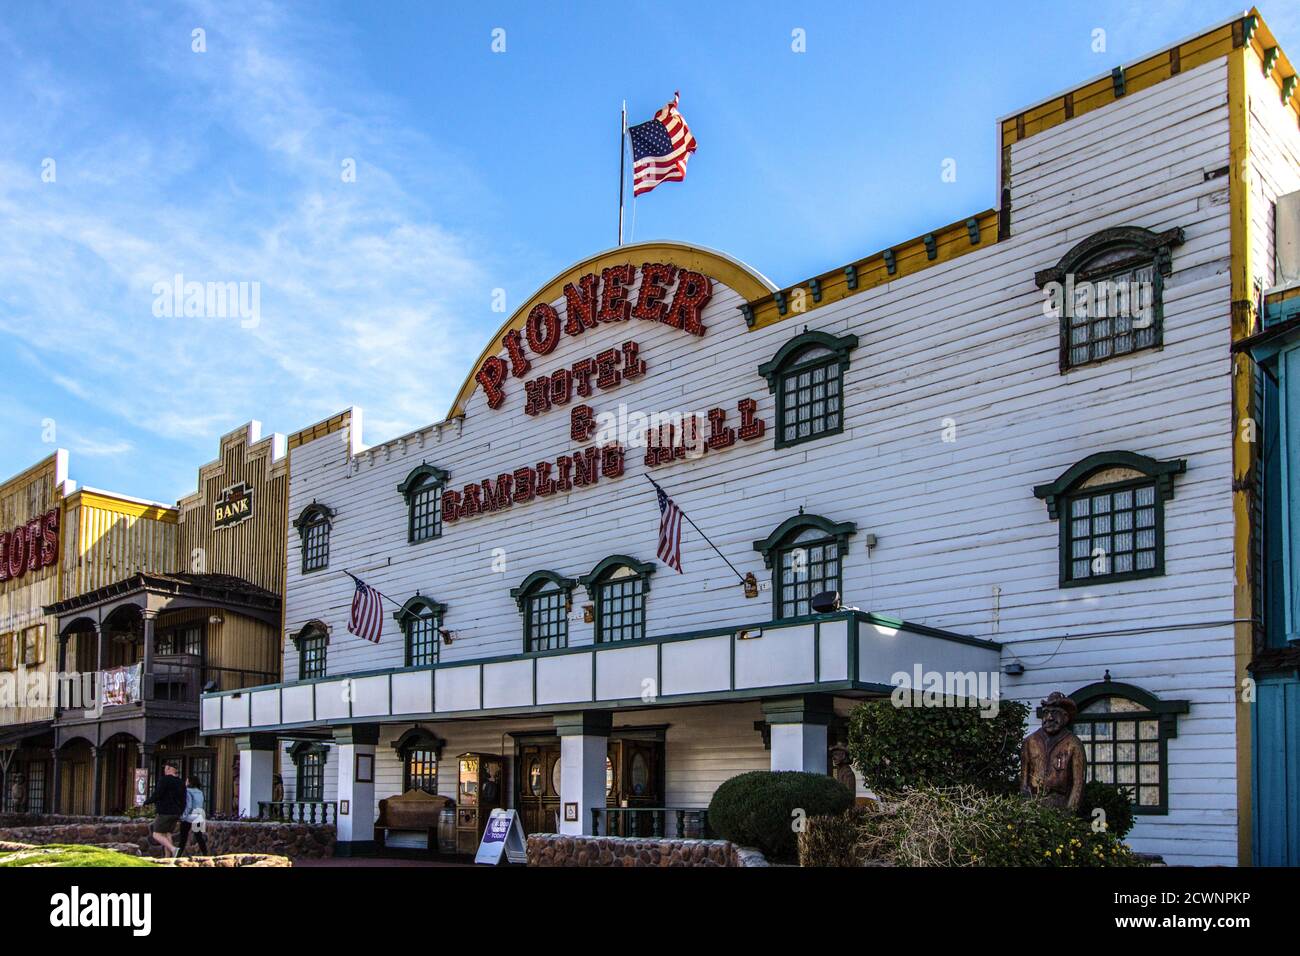 Laughlin, Nevada, USA - February 17, 2020: Exterior of the Pioneer Hotel and Gambling Hall on the Colorado River in Laughlin Nevada. Stock Photo